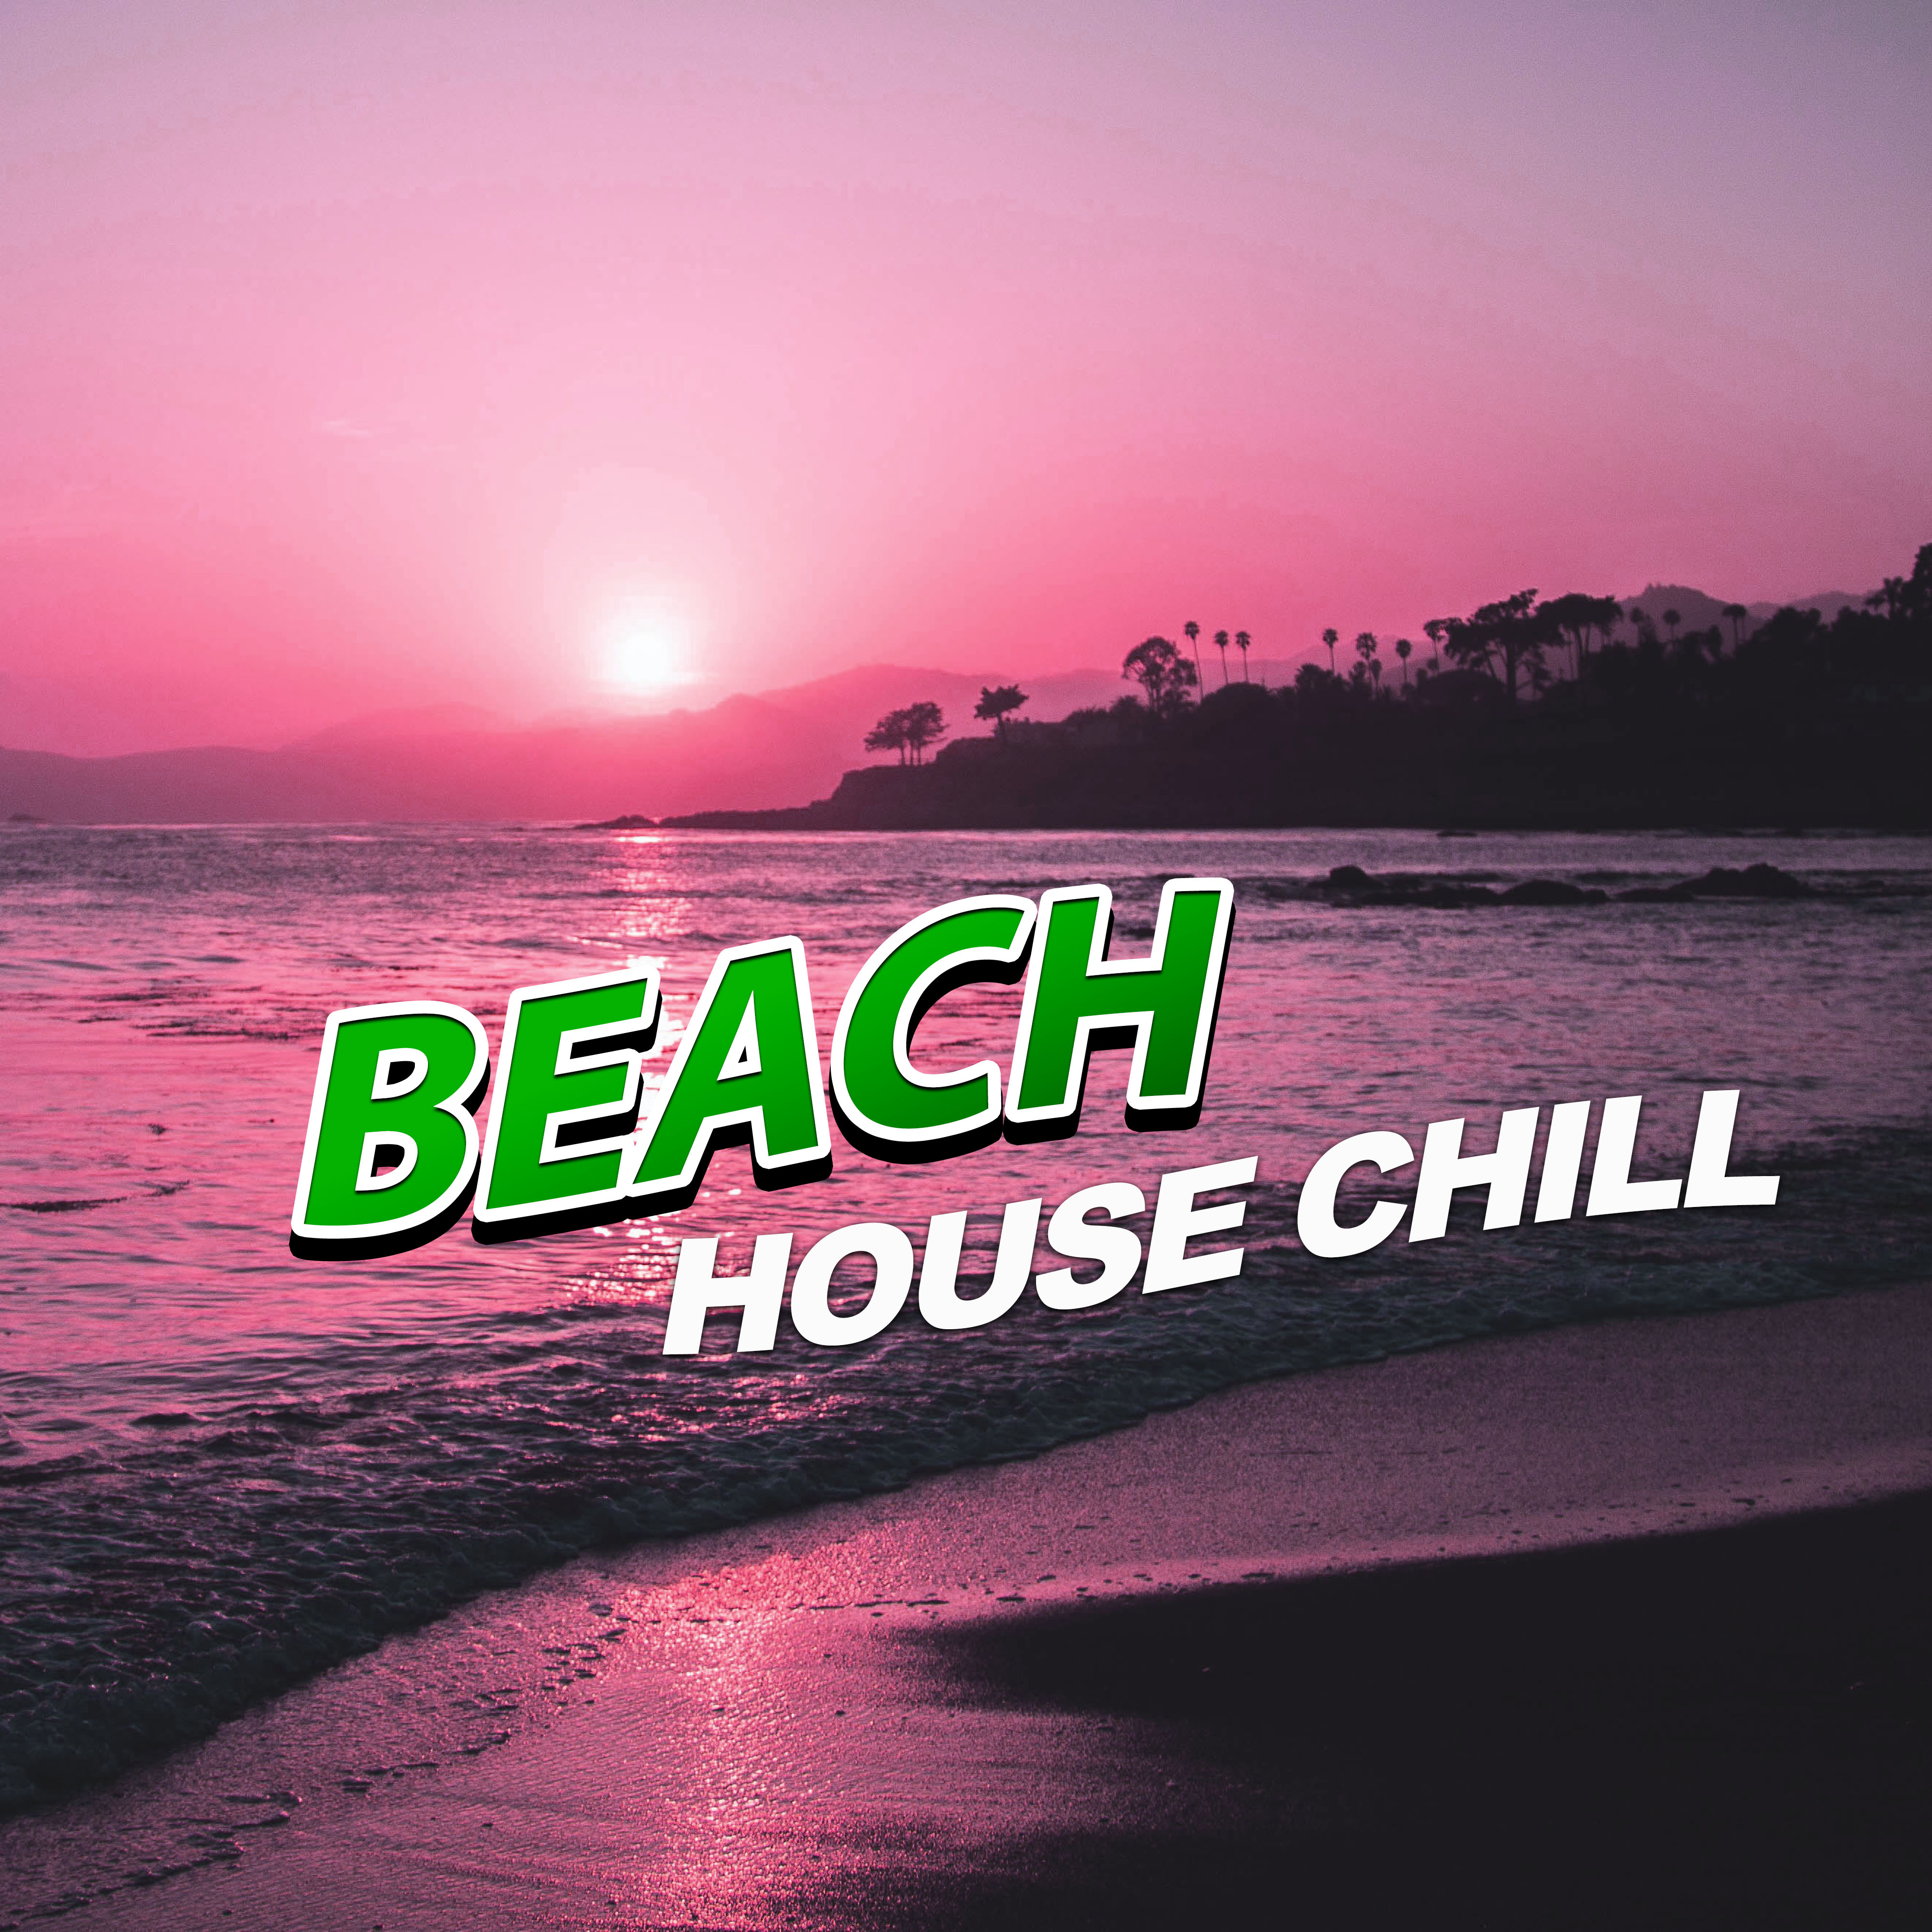 Beach House Chill - Beach Party, Chilling, Relaxation, Holiday Chillout, Relax Yourself